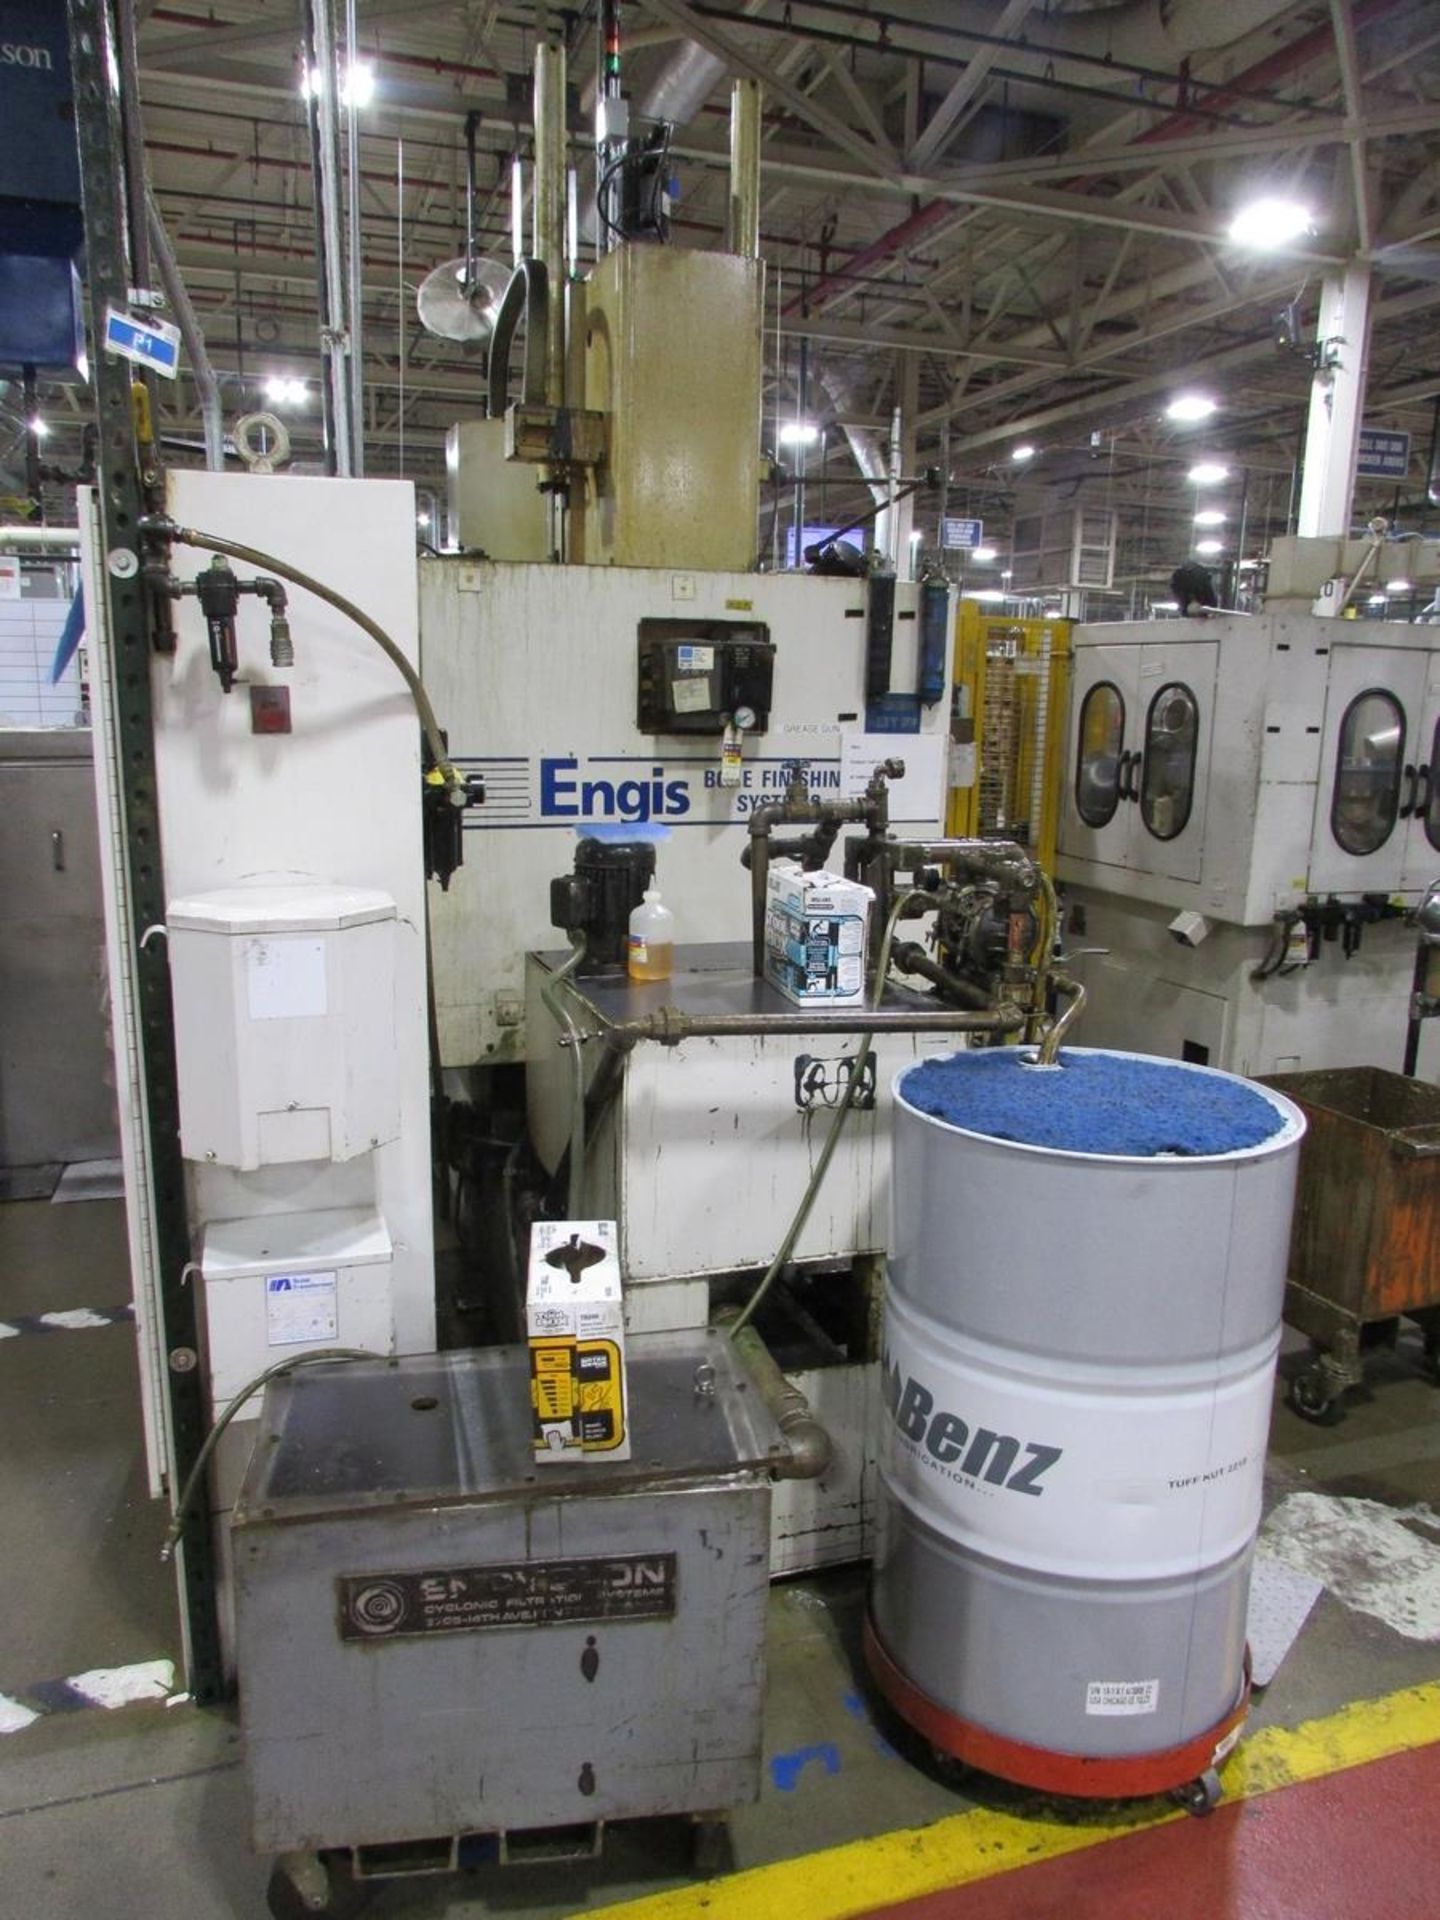 Universal Automatic Machine/ Engis Bore Finishing Systems 9825 16S 6-Spindle Single Column Vertical - Image 10 of 17